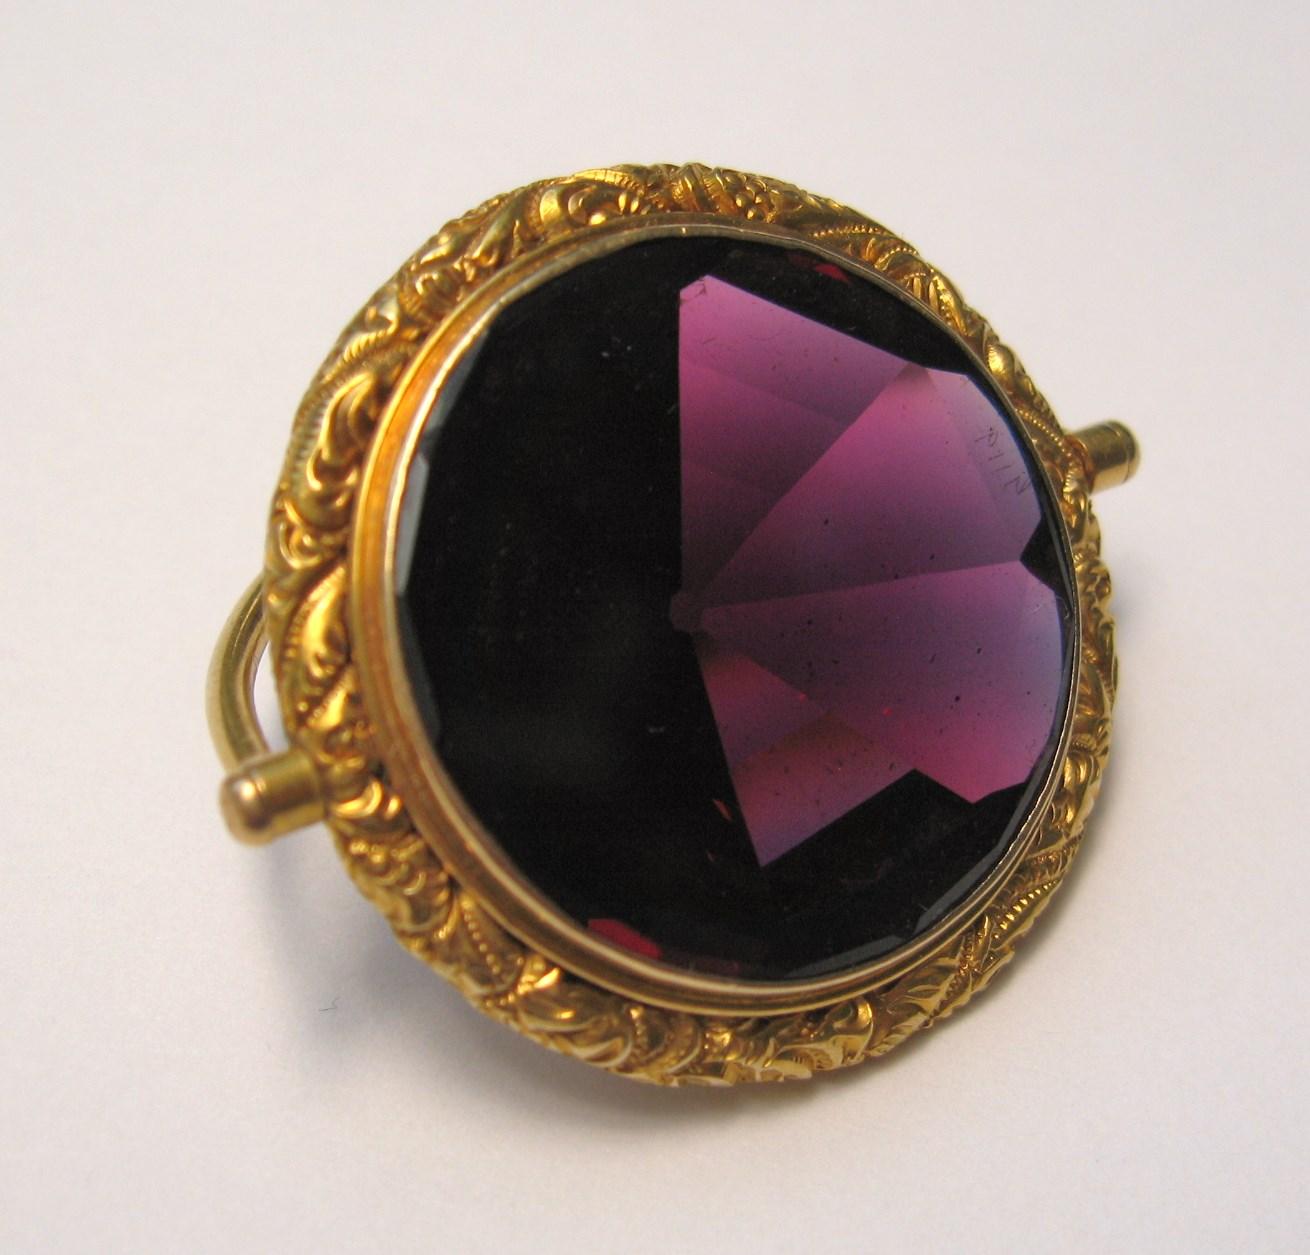 Antique 14K Gold Amethyst Pendant Fob -28 Carats Double Sided. Wonderful scrollwork surrounding the amethyst.  You can wear it either way. Measures 1.56